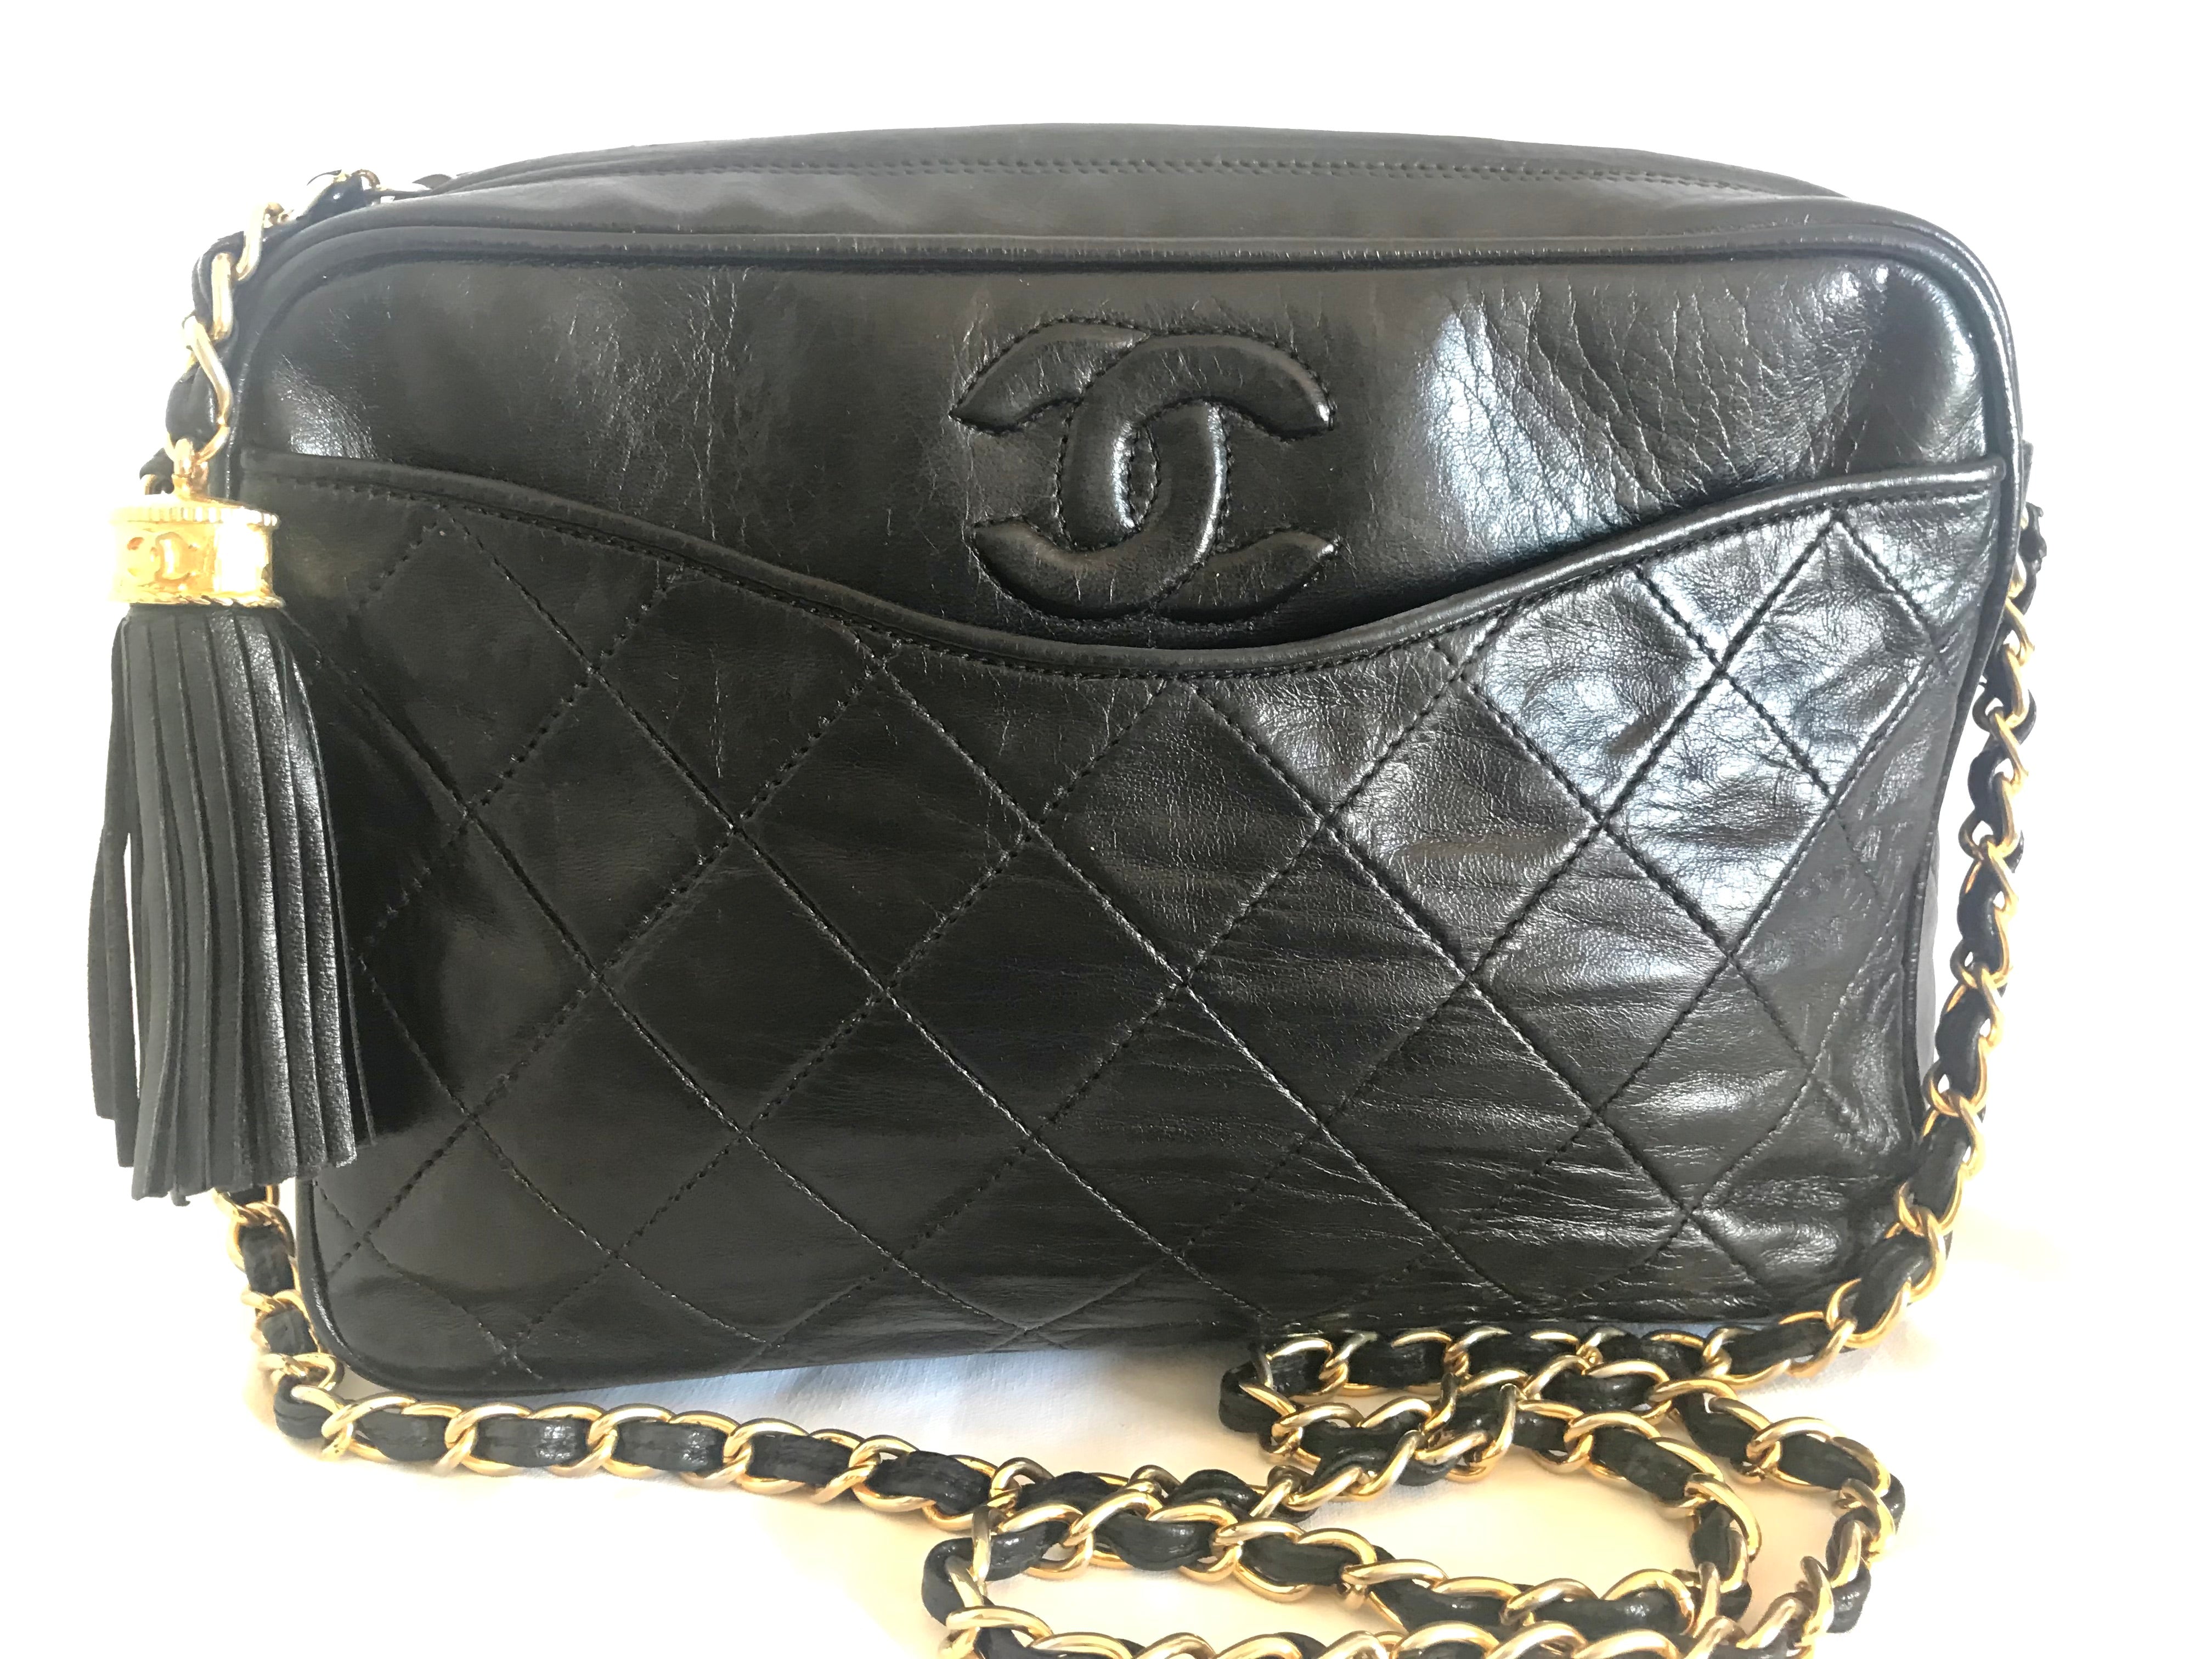 tote women chanel bags authentic